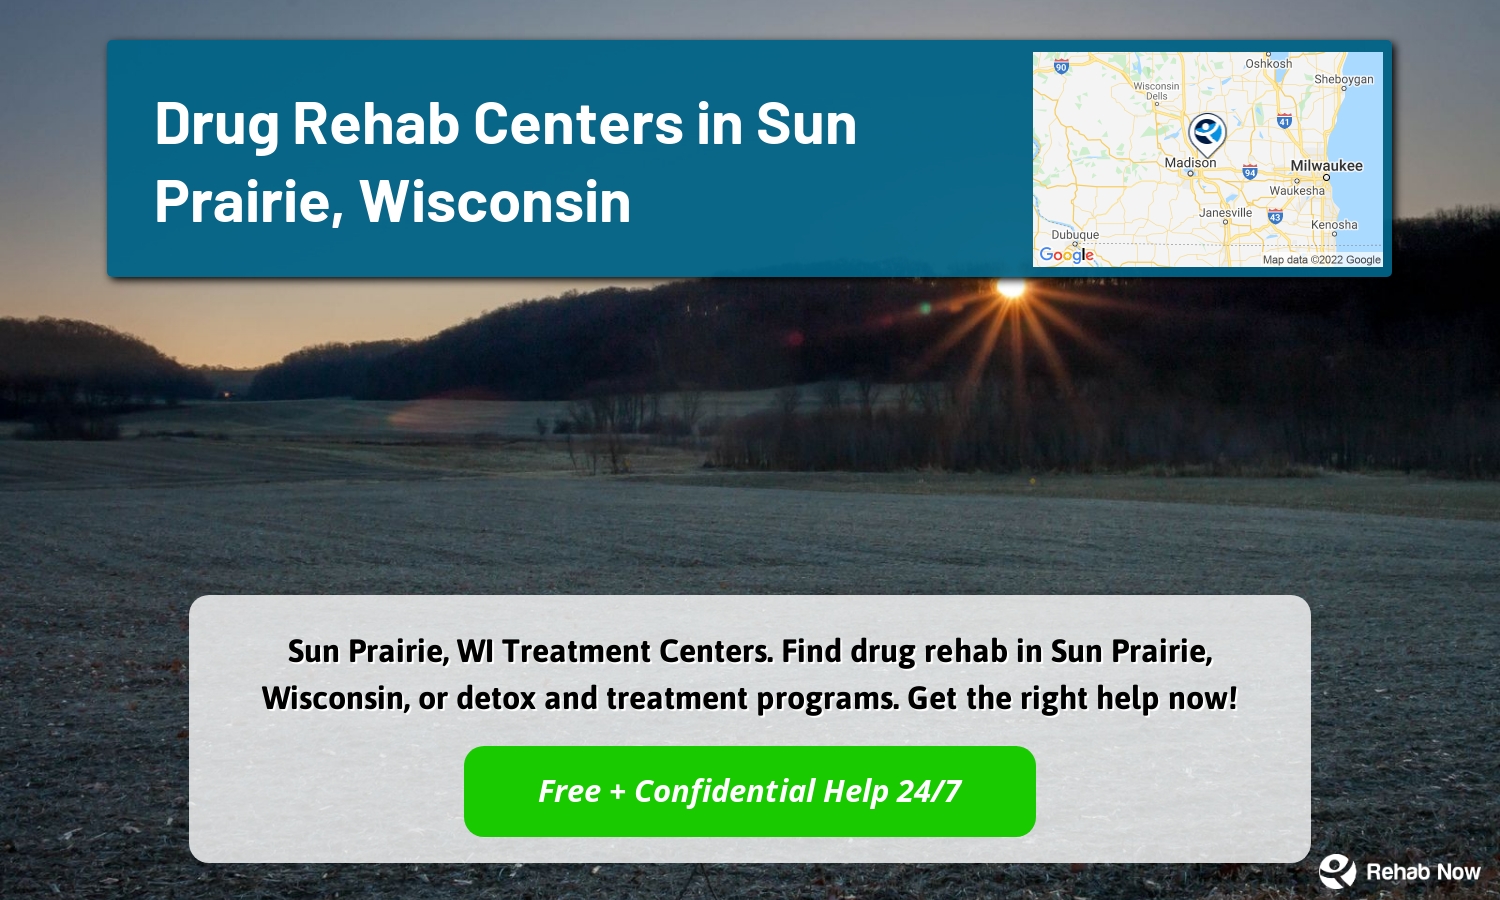 Sun Prairie, WI Treatment Centers. Find drug rehab in Sun Prairie, Wisconsin, or detox and treatment programs. Get the right help now!